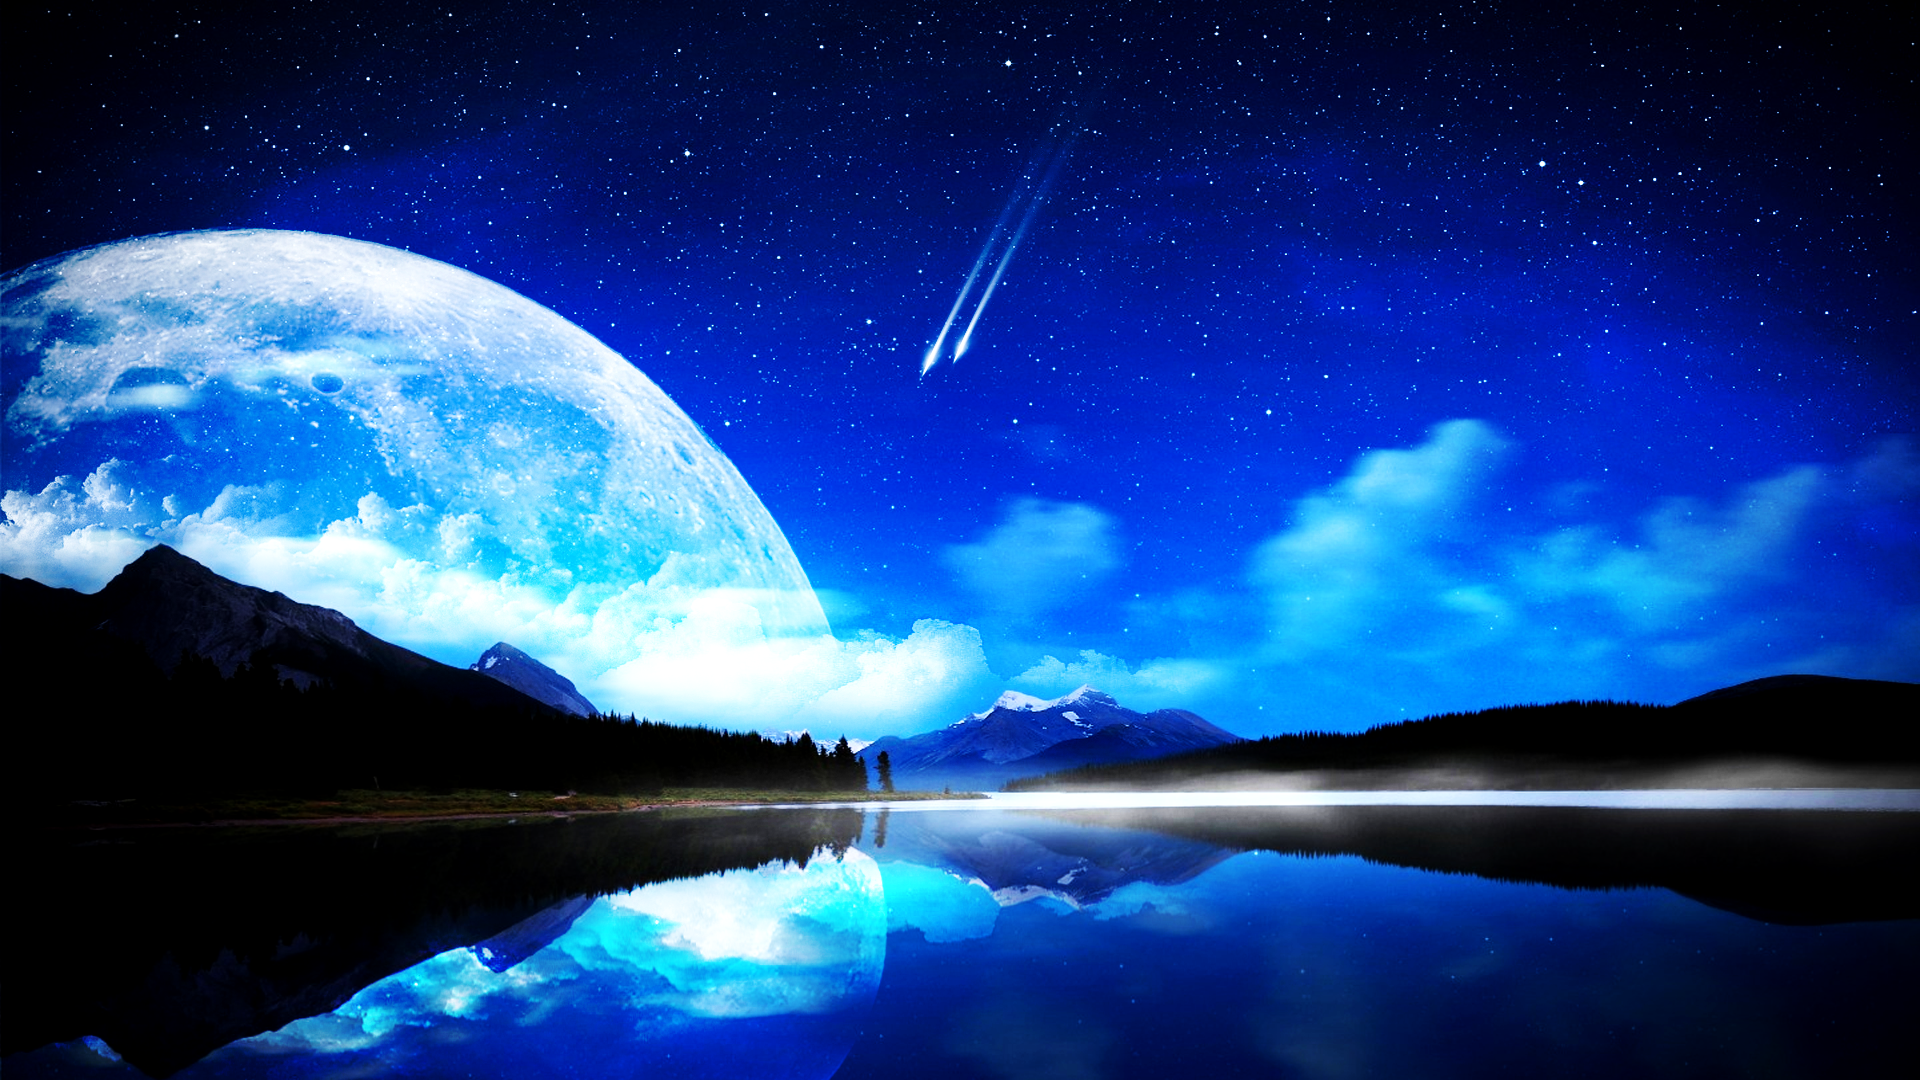 The blue moon HD Wallpapers | Wallpapers, Backgrounds, Images, Art ...